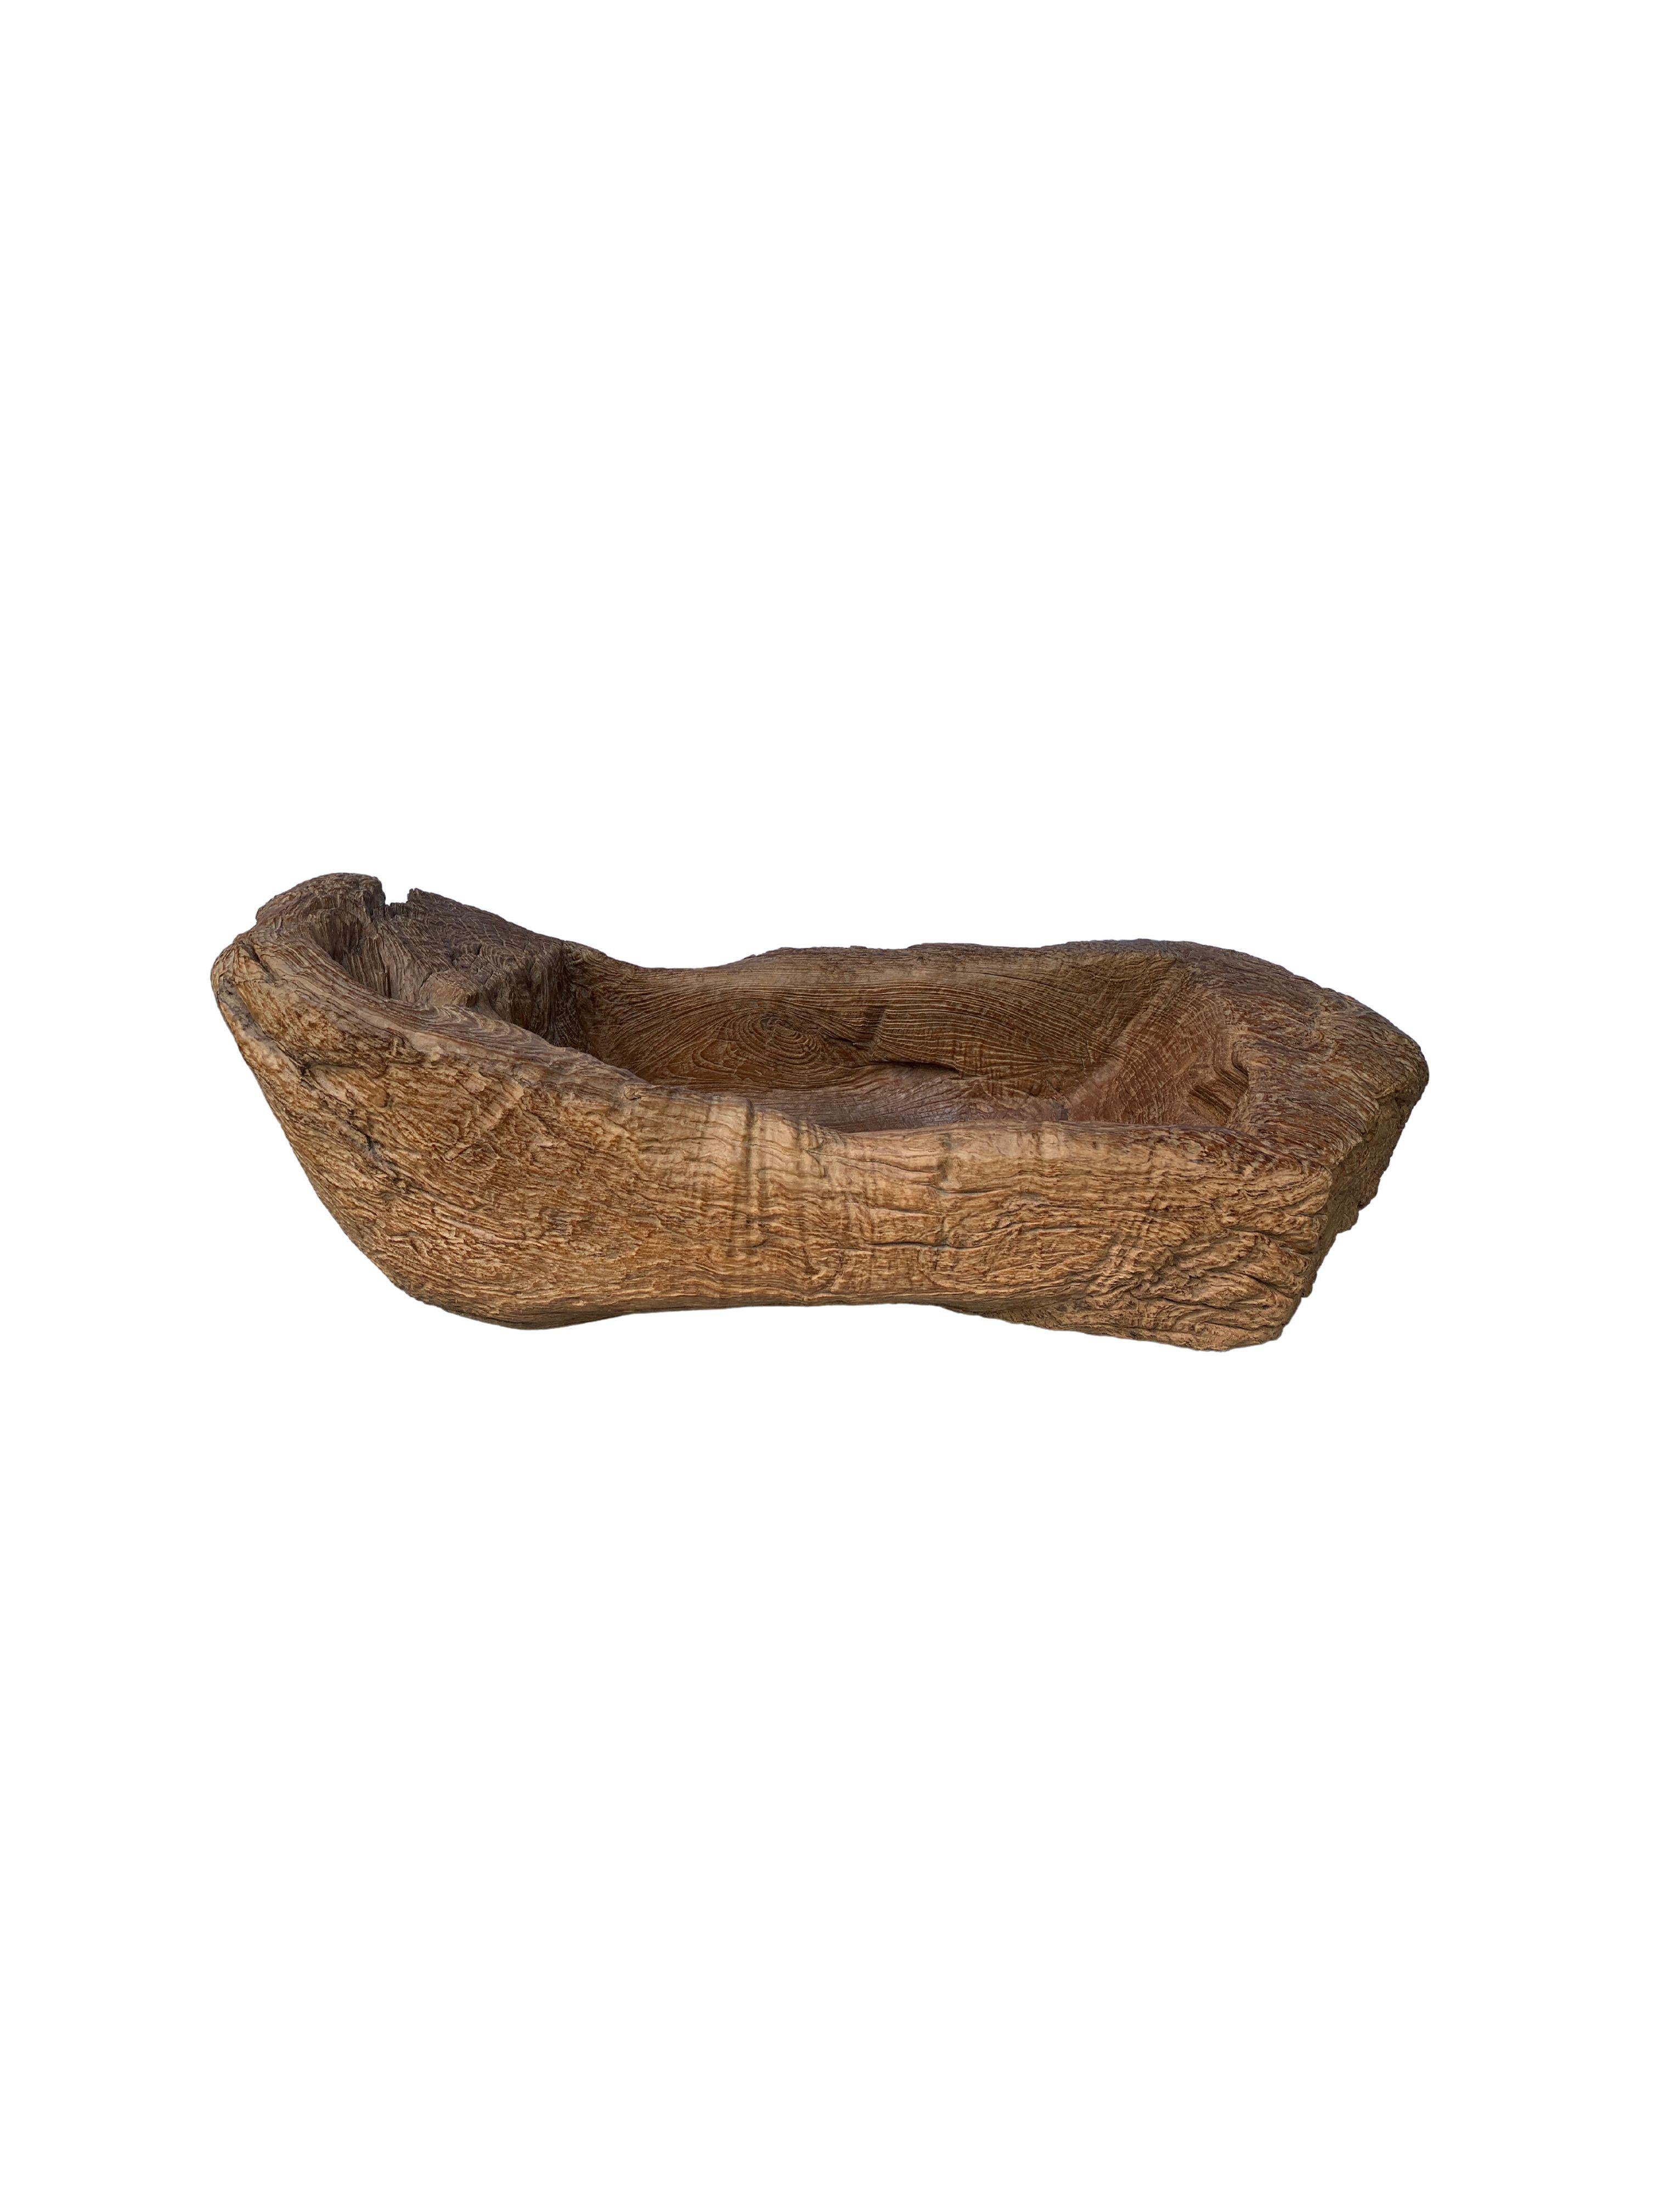 A teak planter crafted on the island of Java, Indonesia. It was cut from a much larger slab of wood and maintains an organic shape and natural texture. A wonderfully sculptural object that maintains much of its raw form. 

